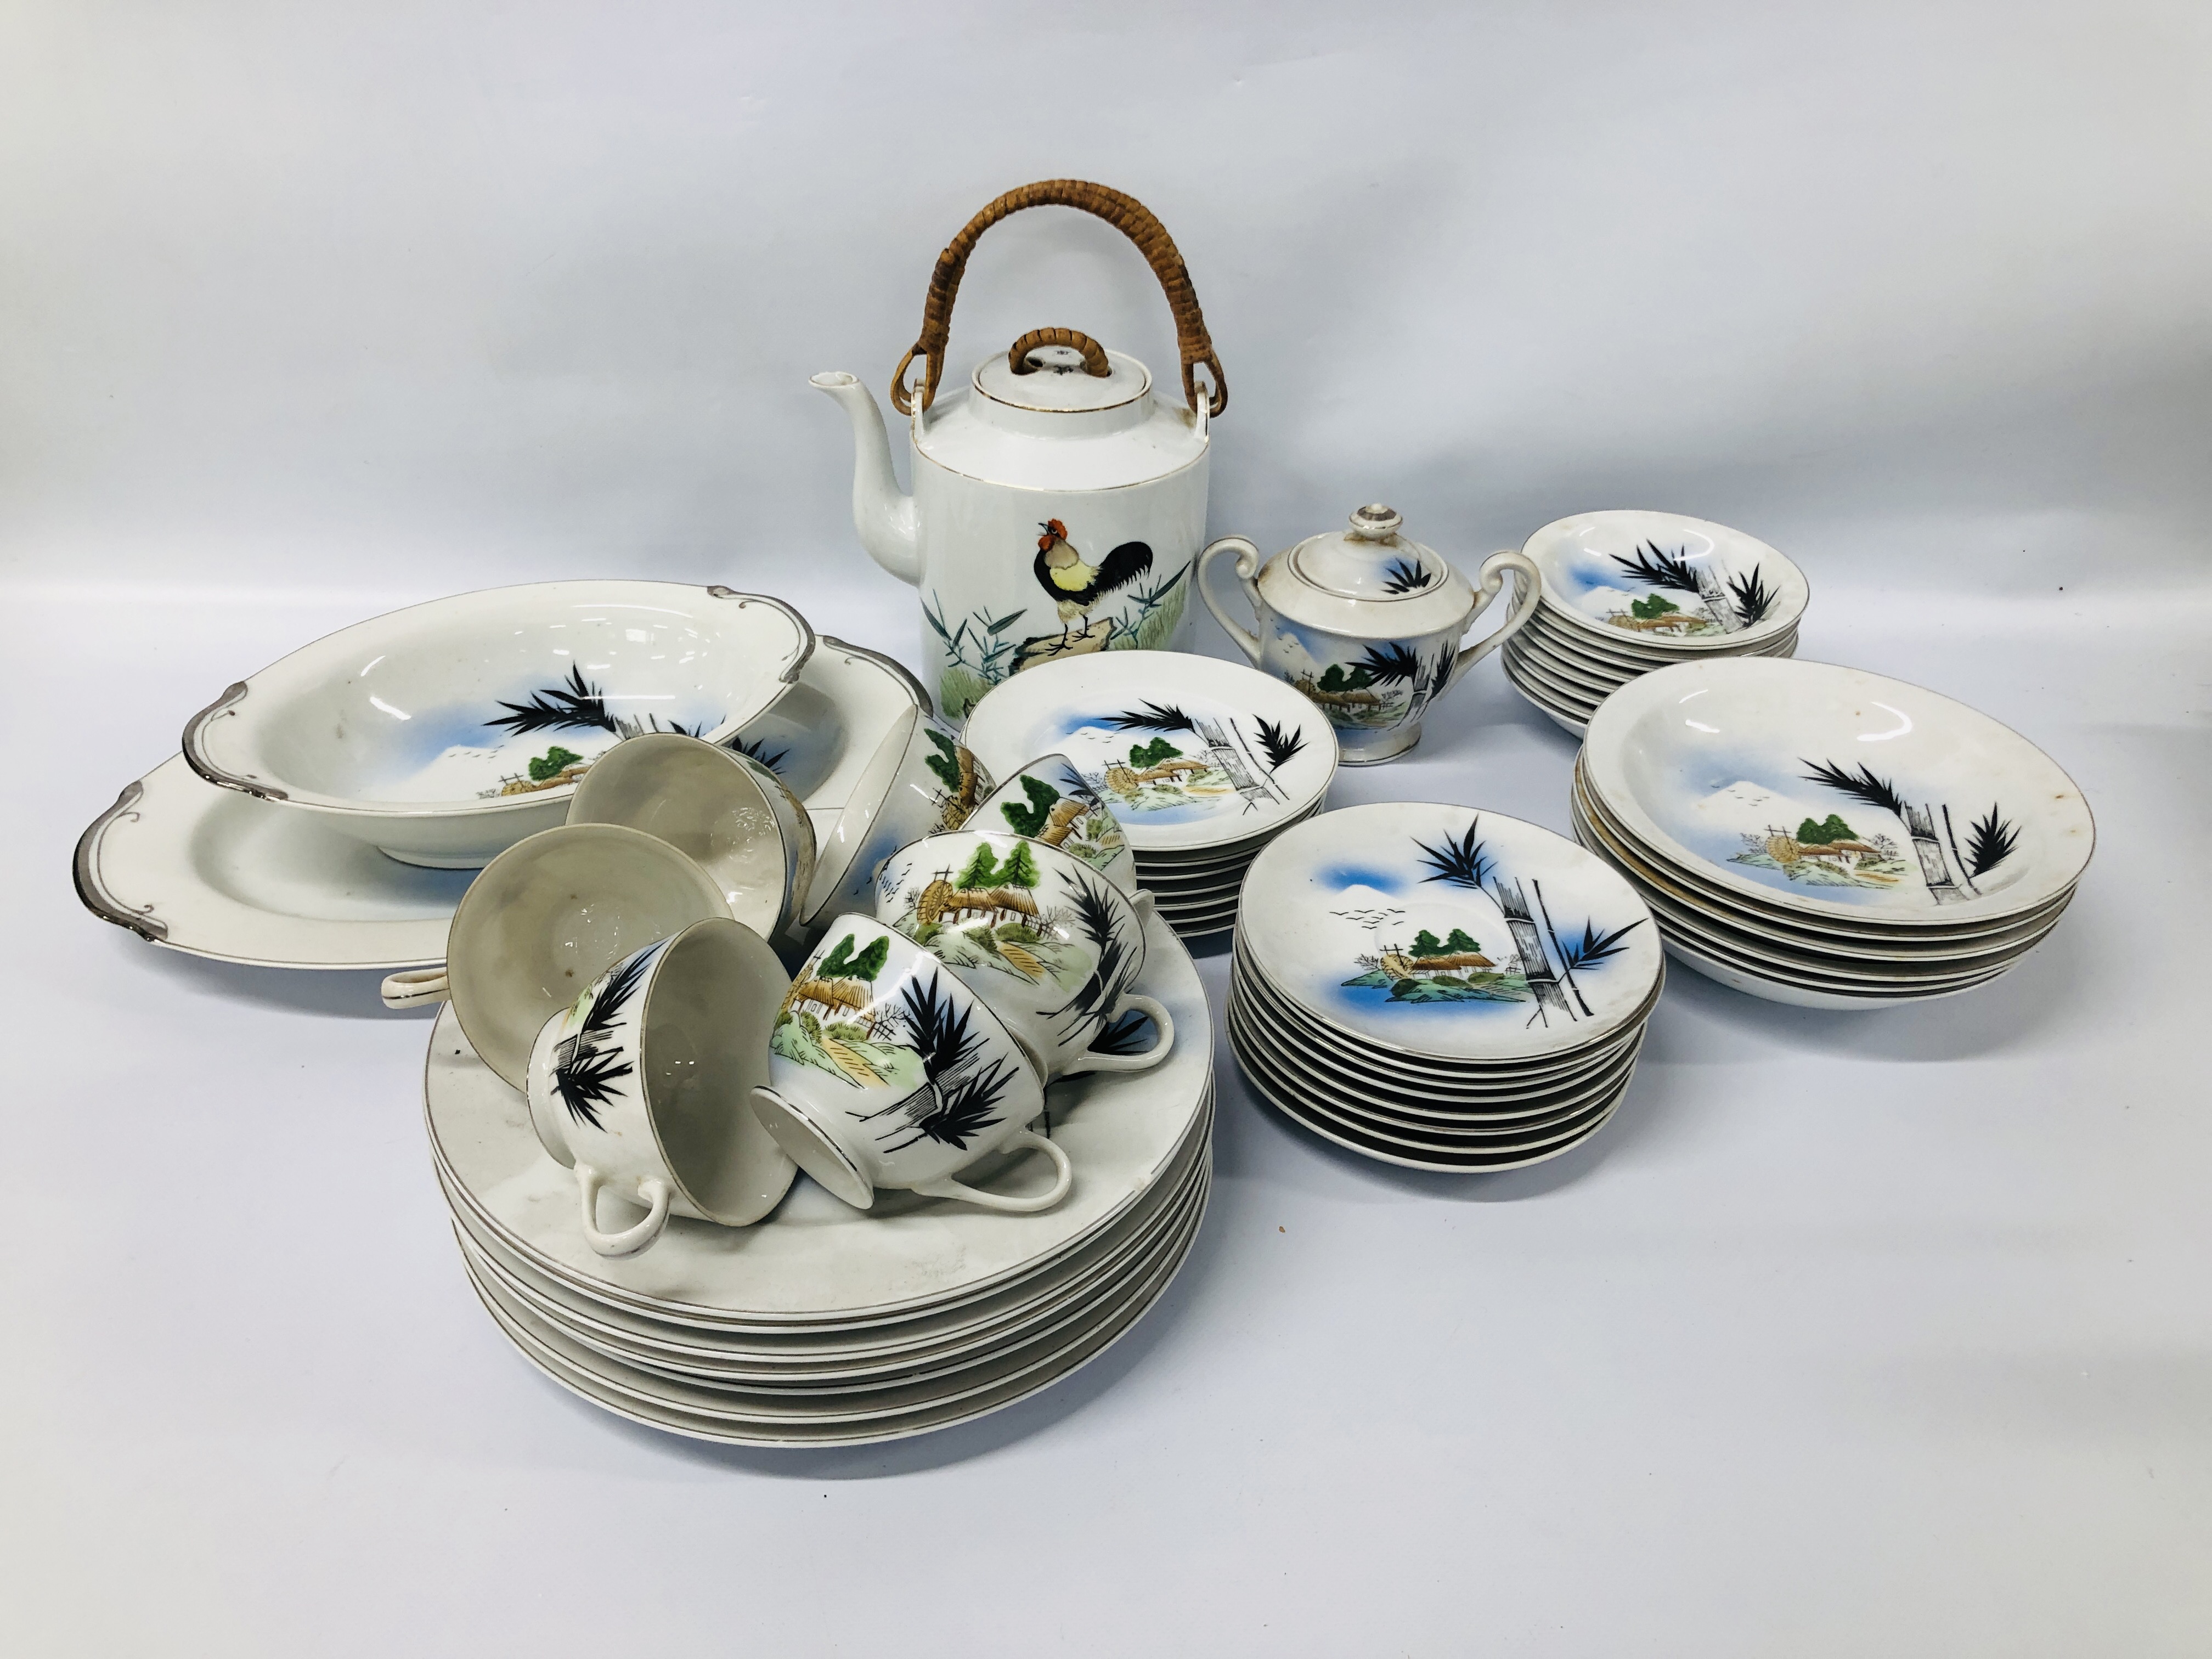 46 PIECES OF E & O CHINA WARE COMPRISING OF PLATES, BOWLS, CUPS AND SAUCERS, SERVING PLATE,